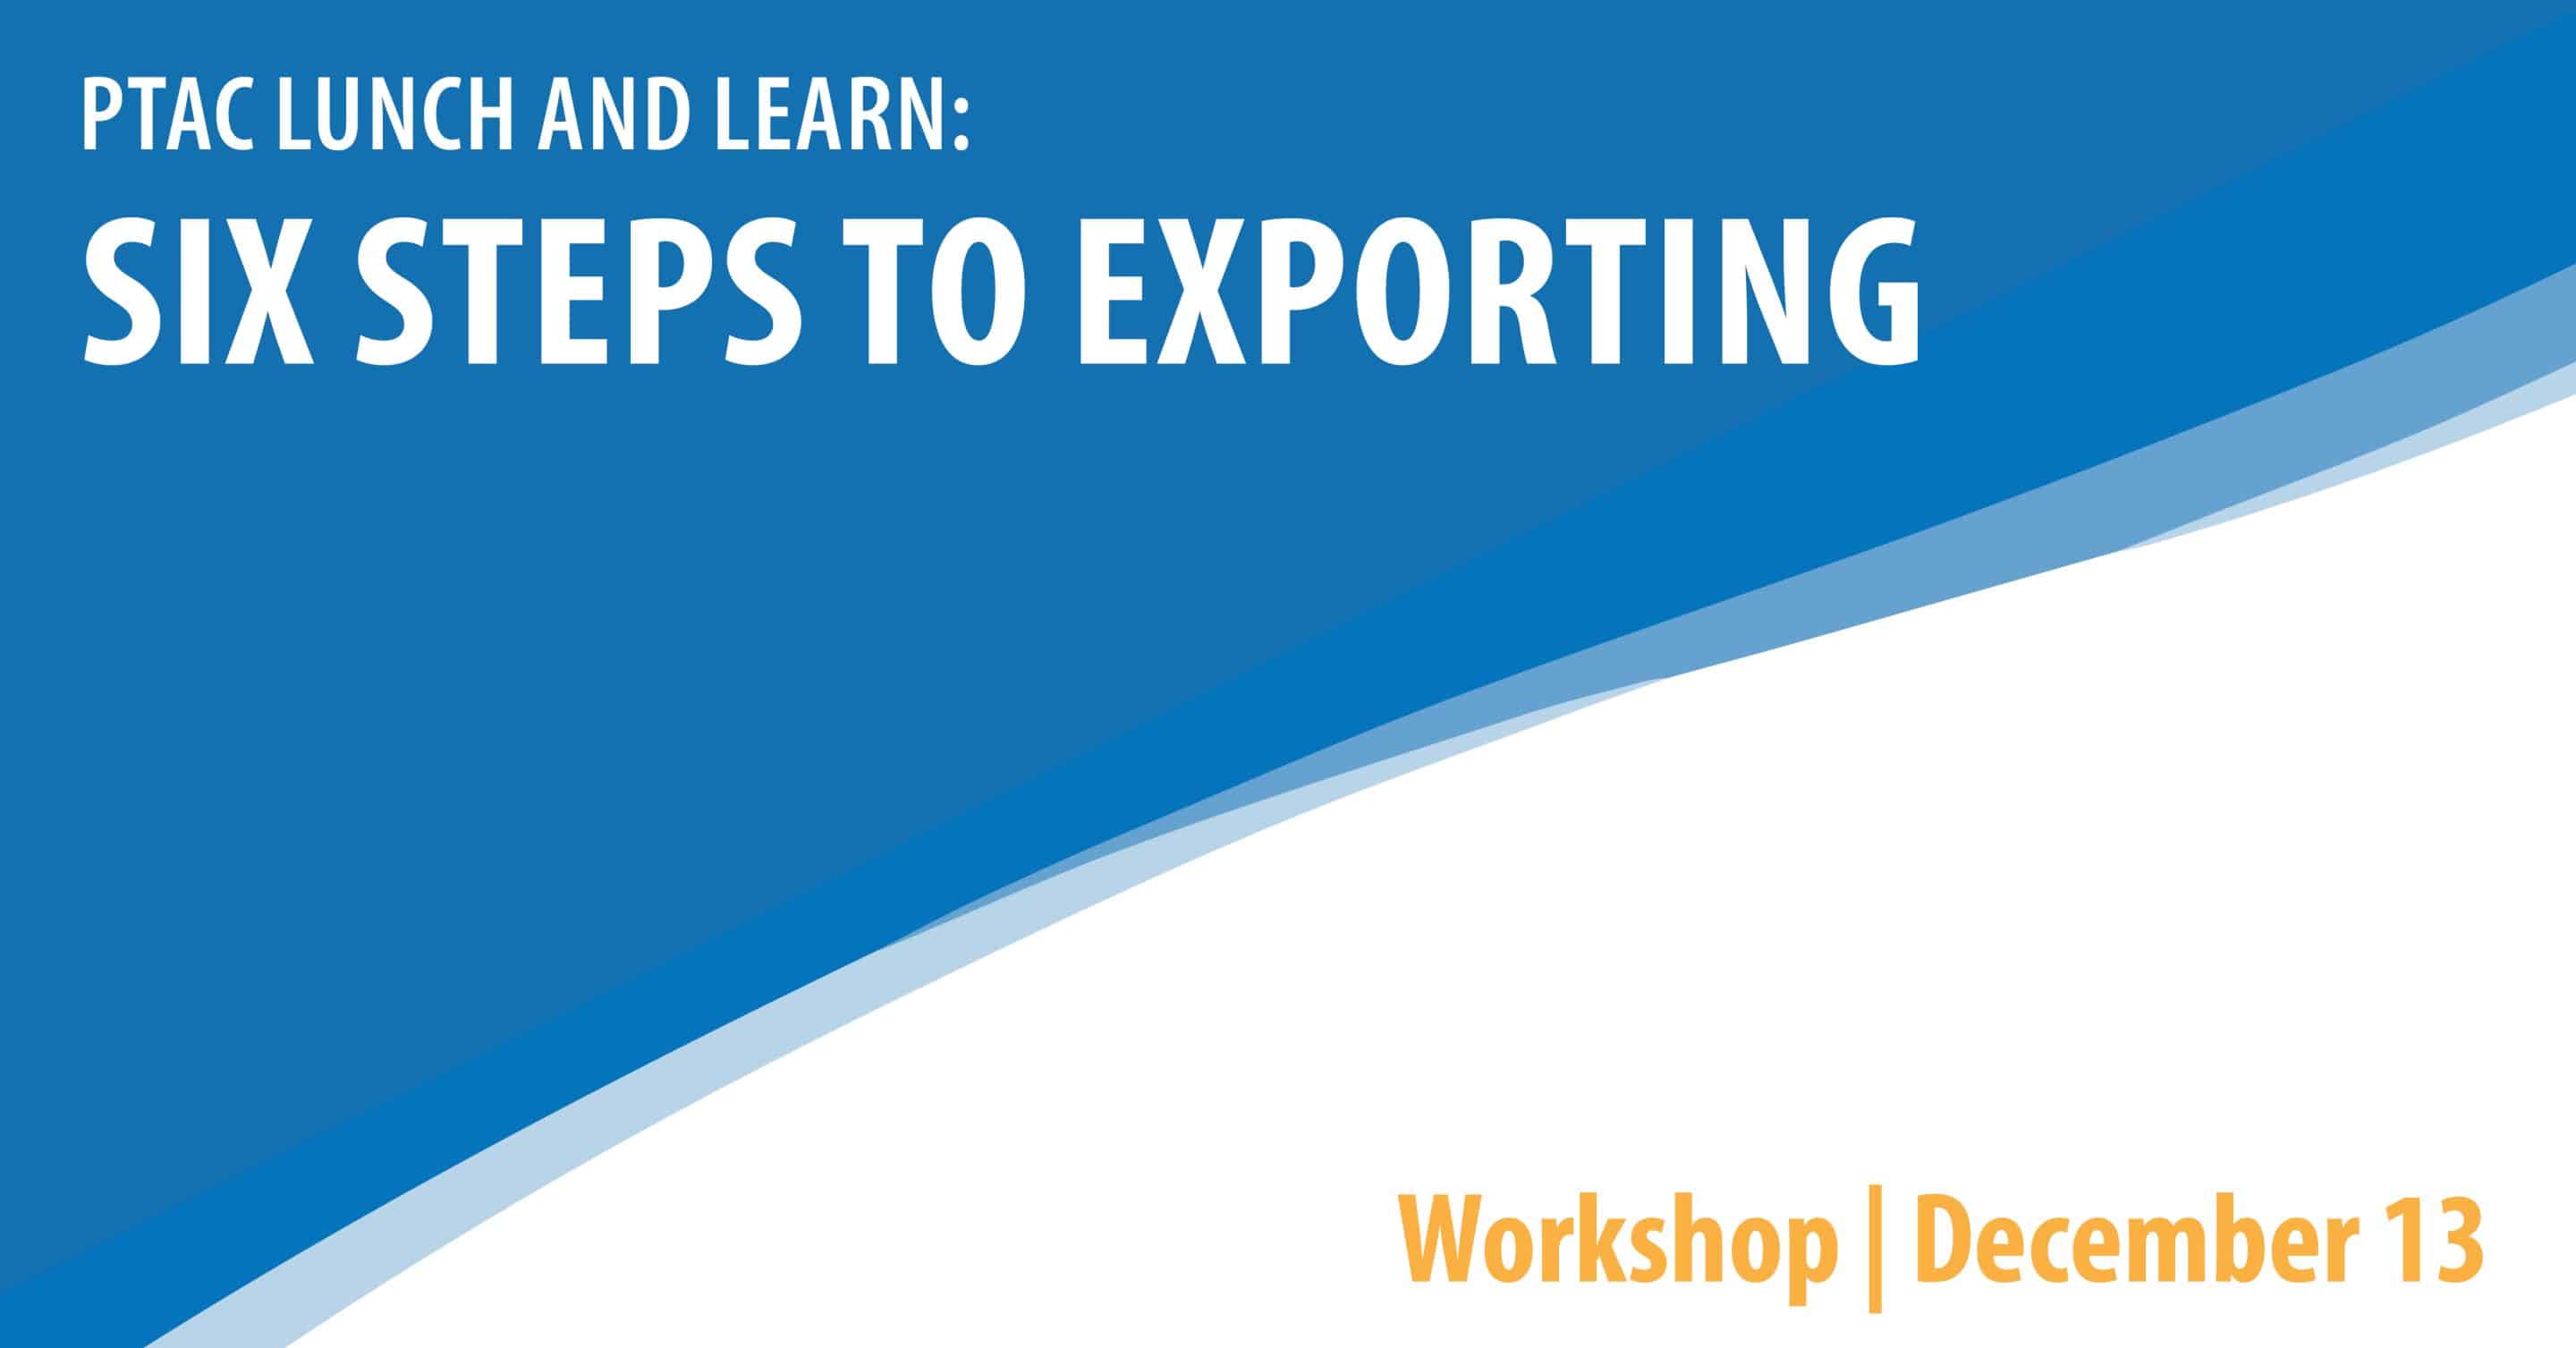 PTAC Lunch and Learn:  Six Steps to Exporting